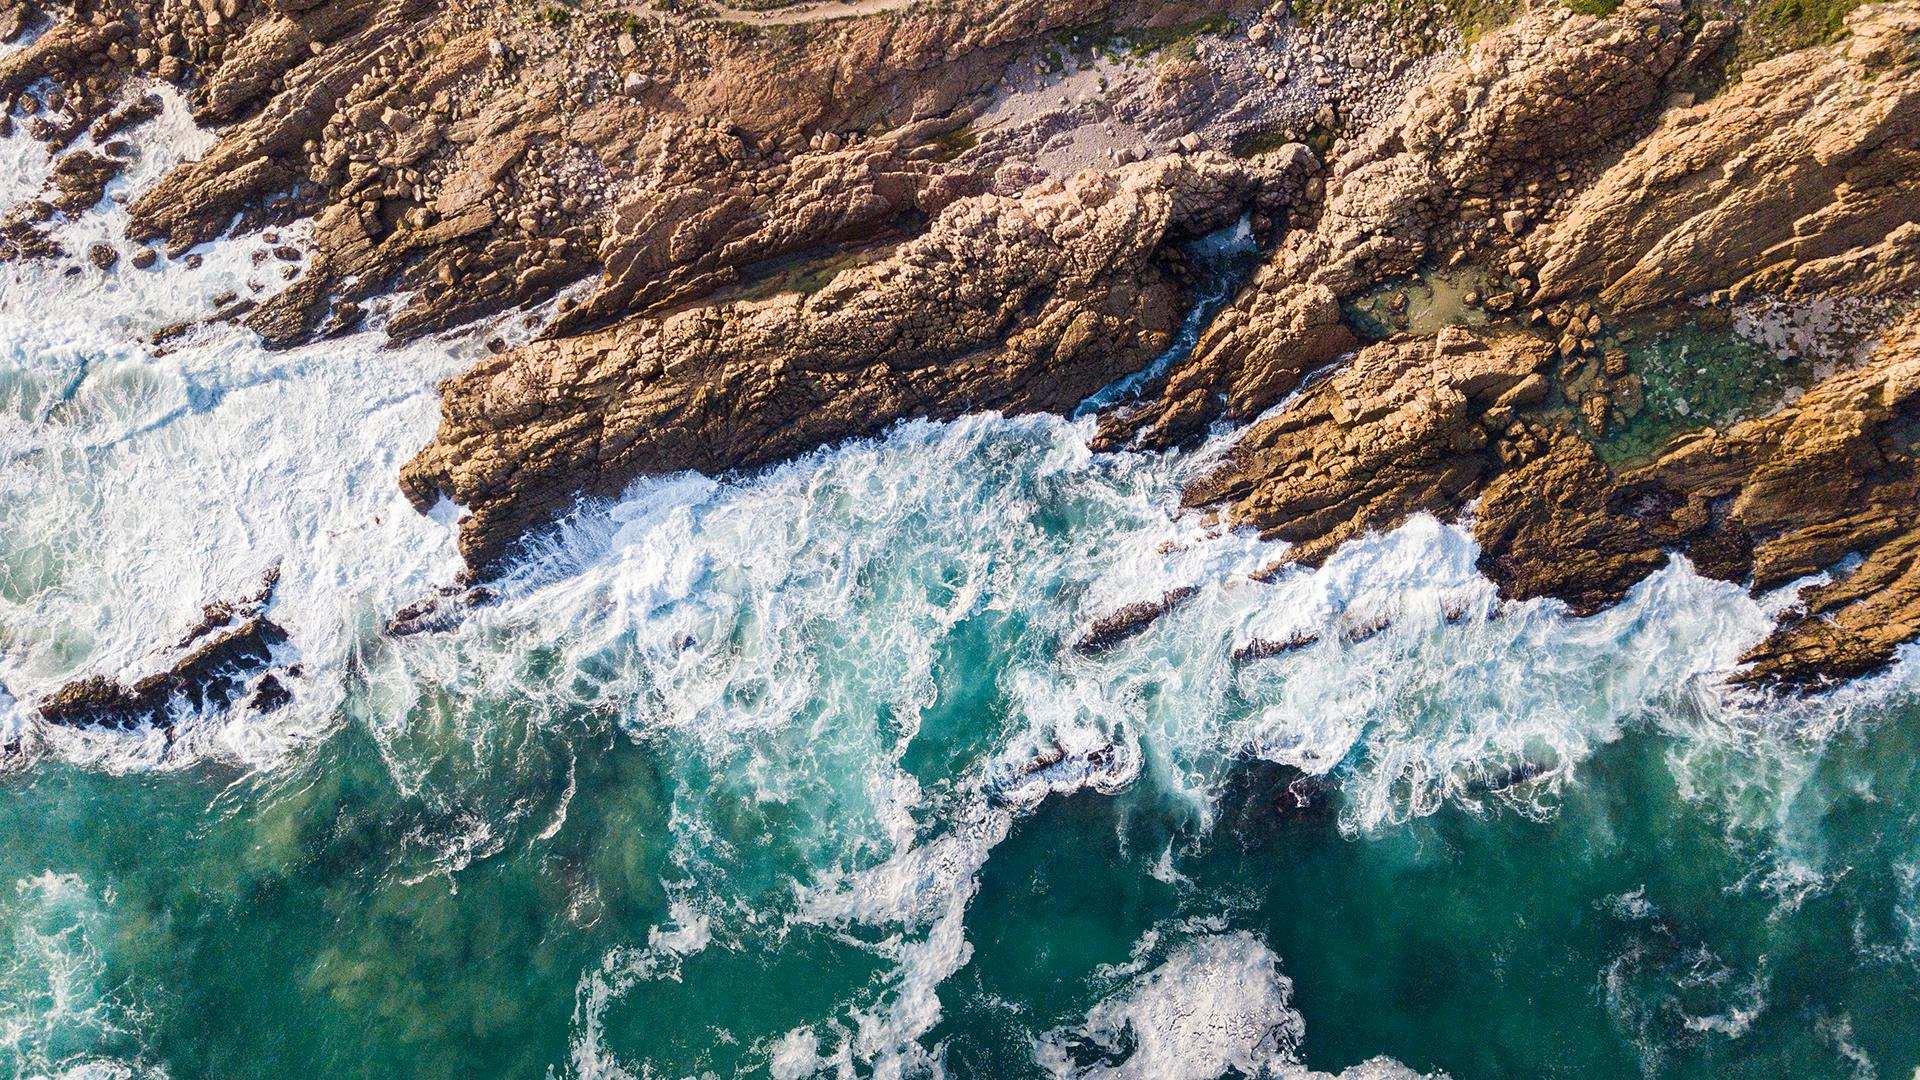 Aerial view of waves crashing along a rocky shoreline.